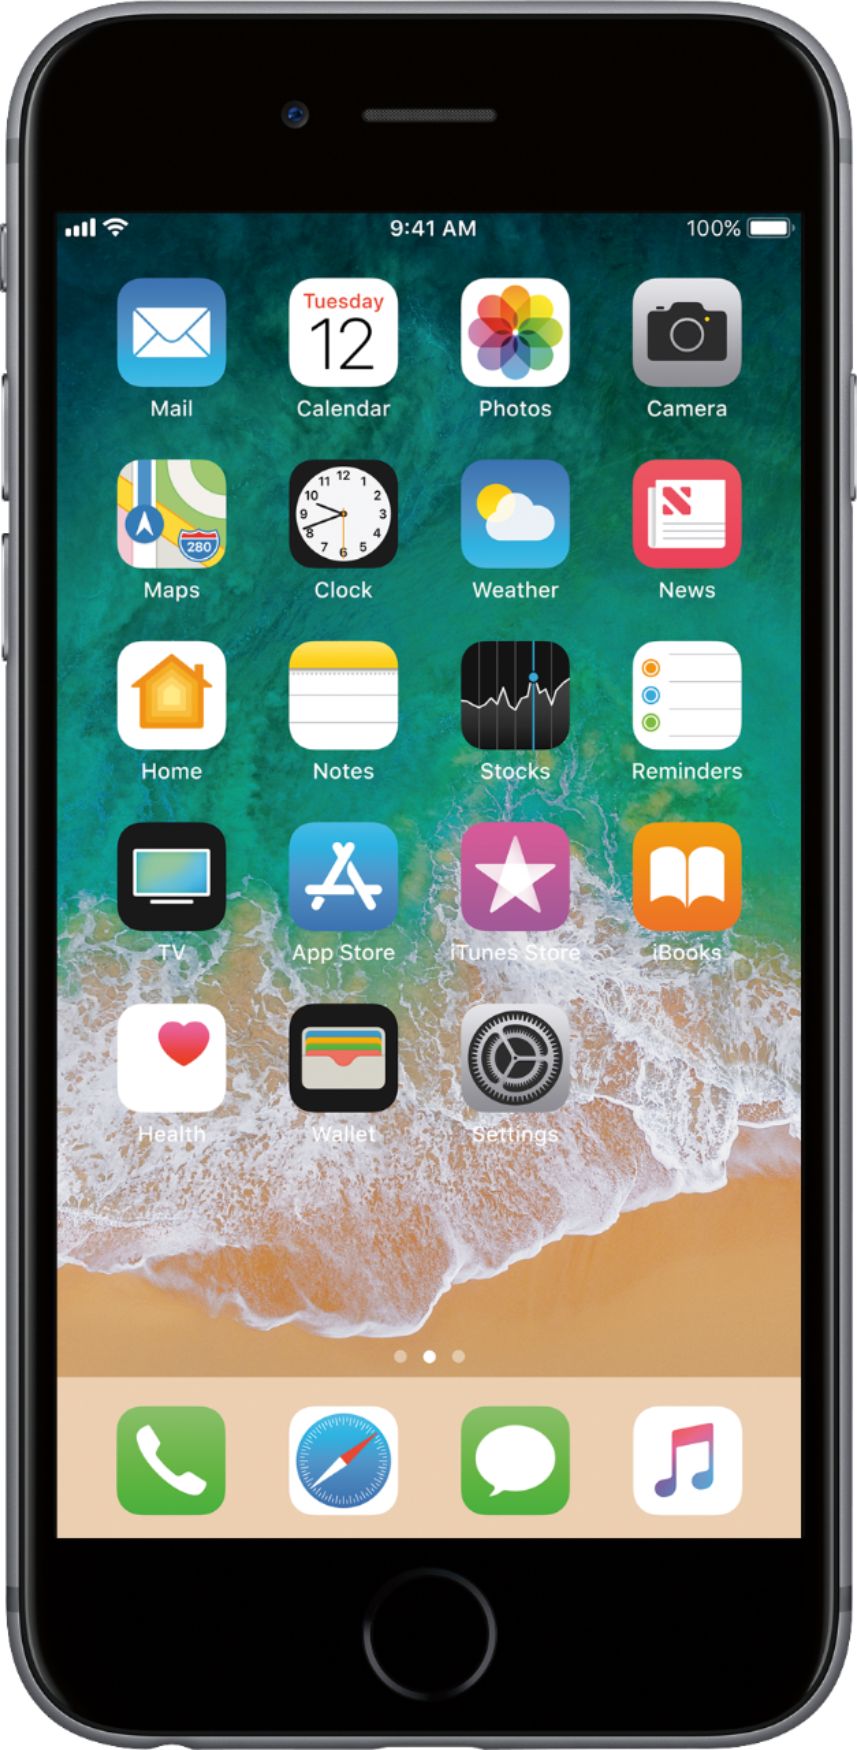 AT&T Prepaid Apple iPhone 6 4G LTE with 32GB Memory ...